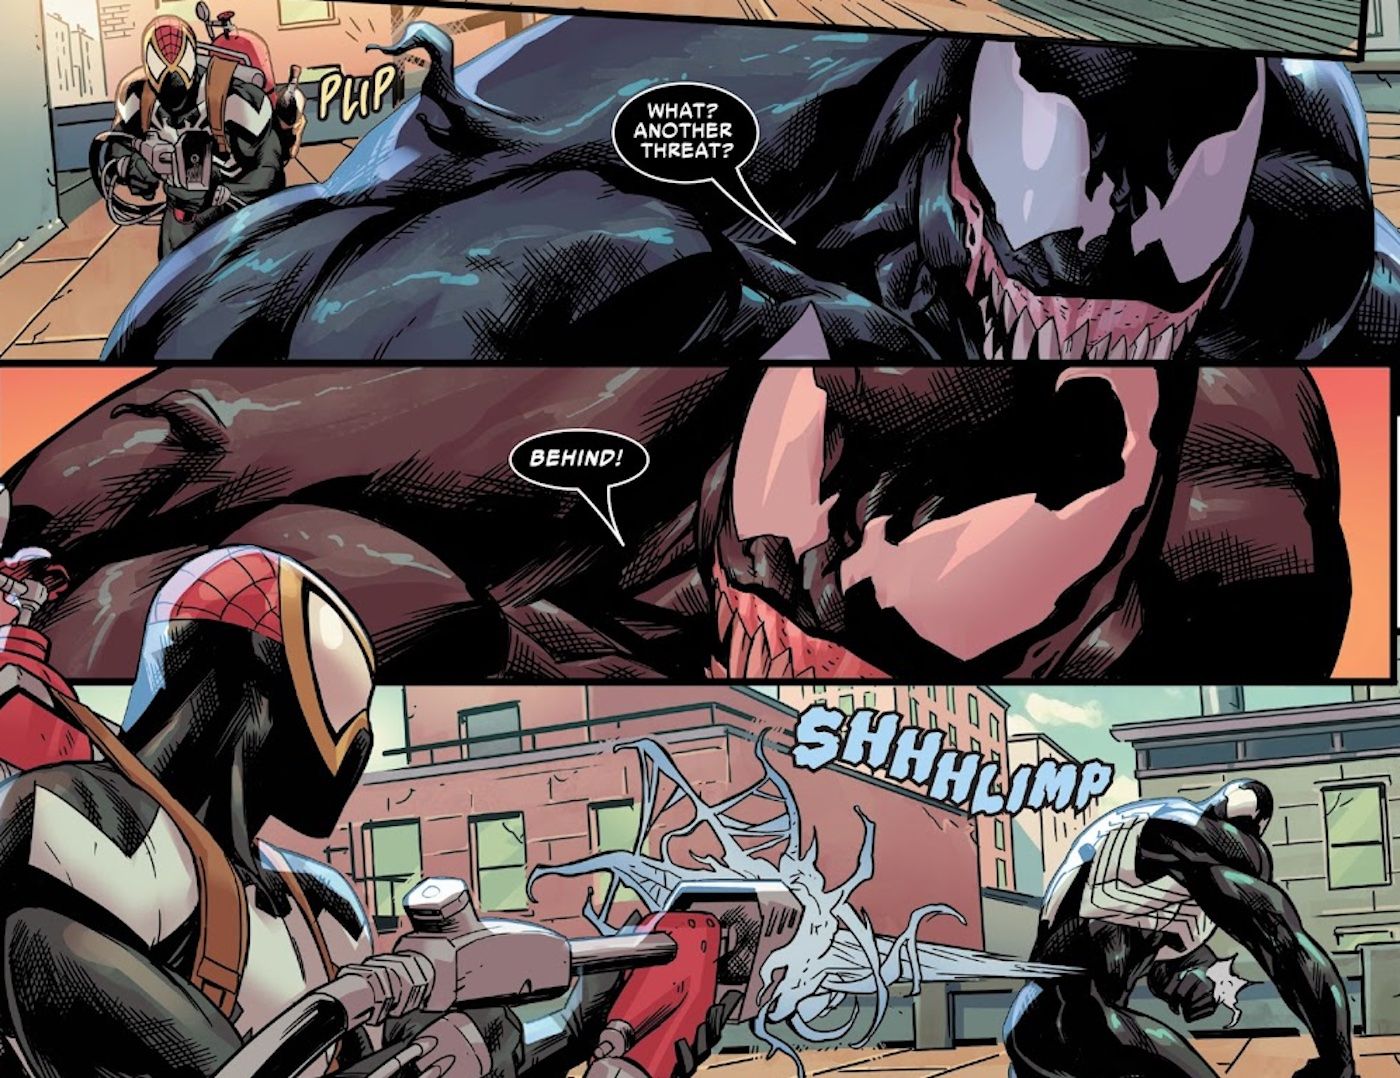 Venom is attacked from behind